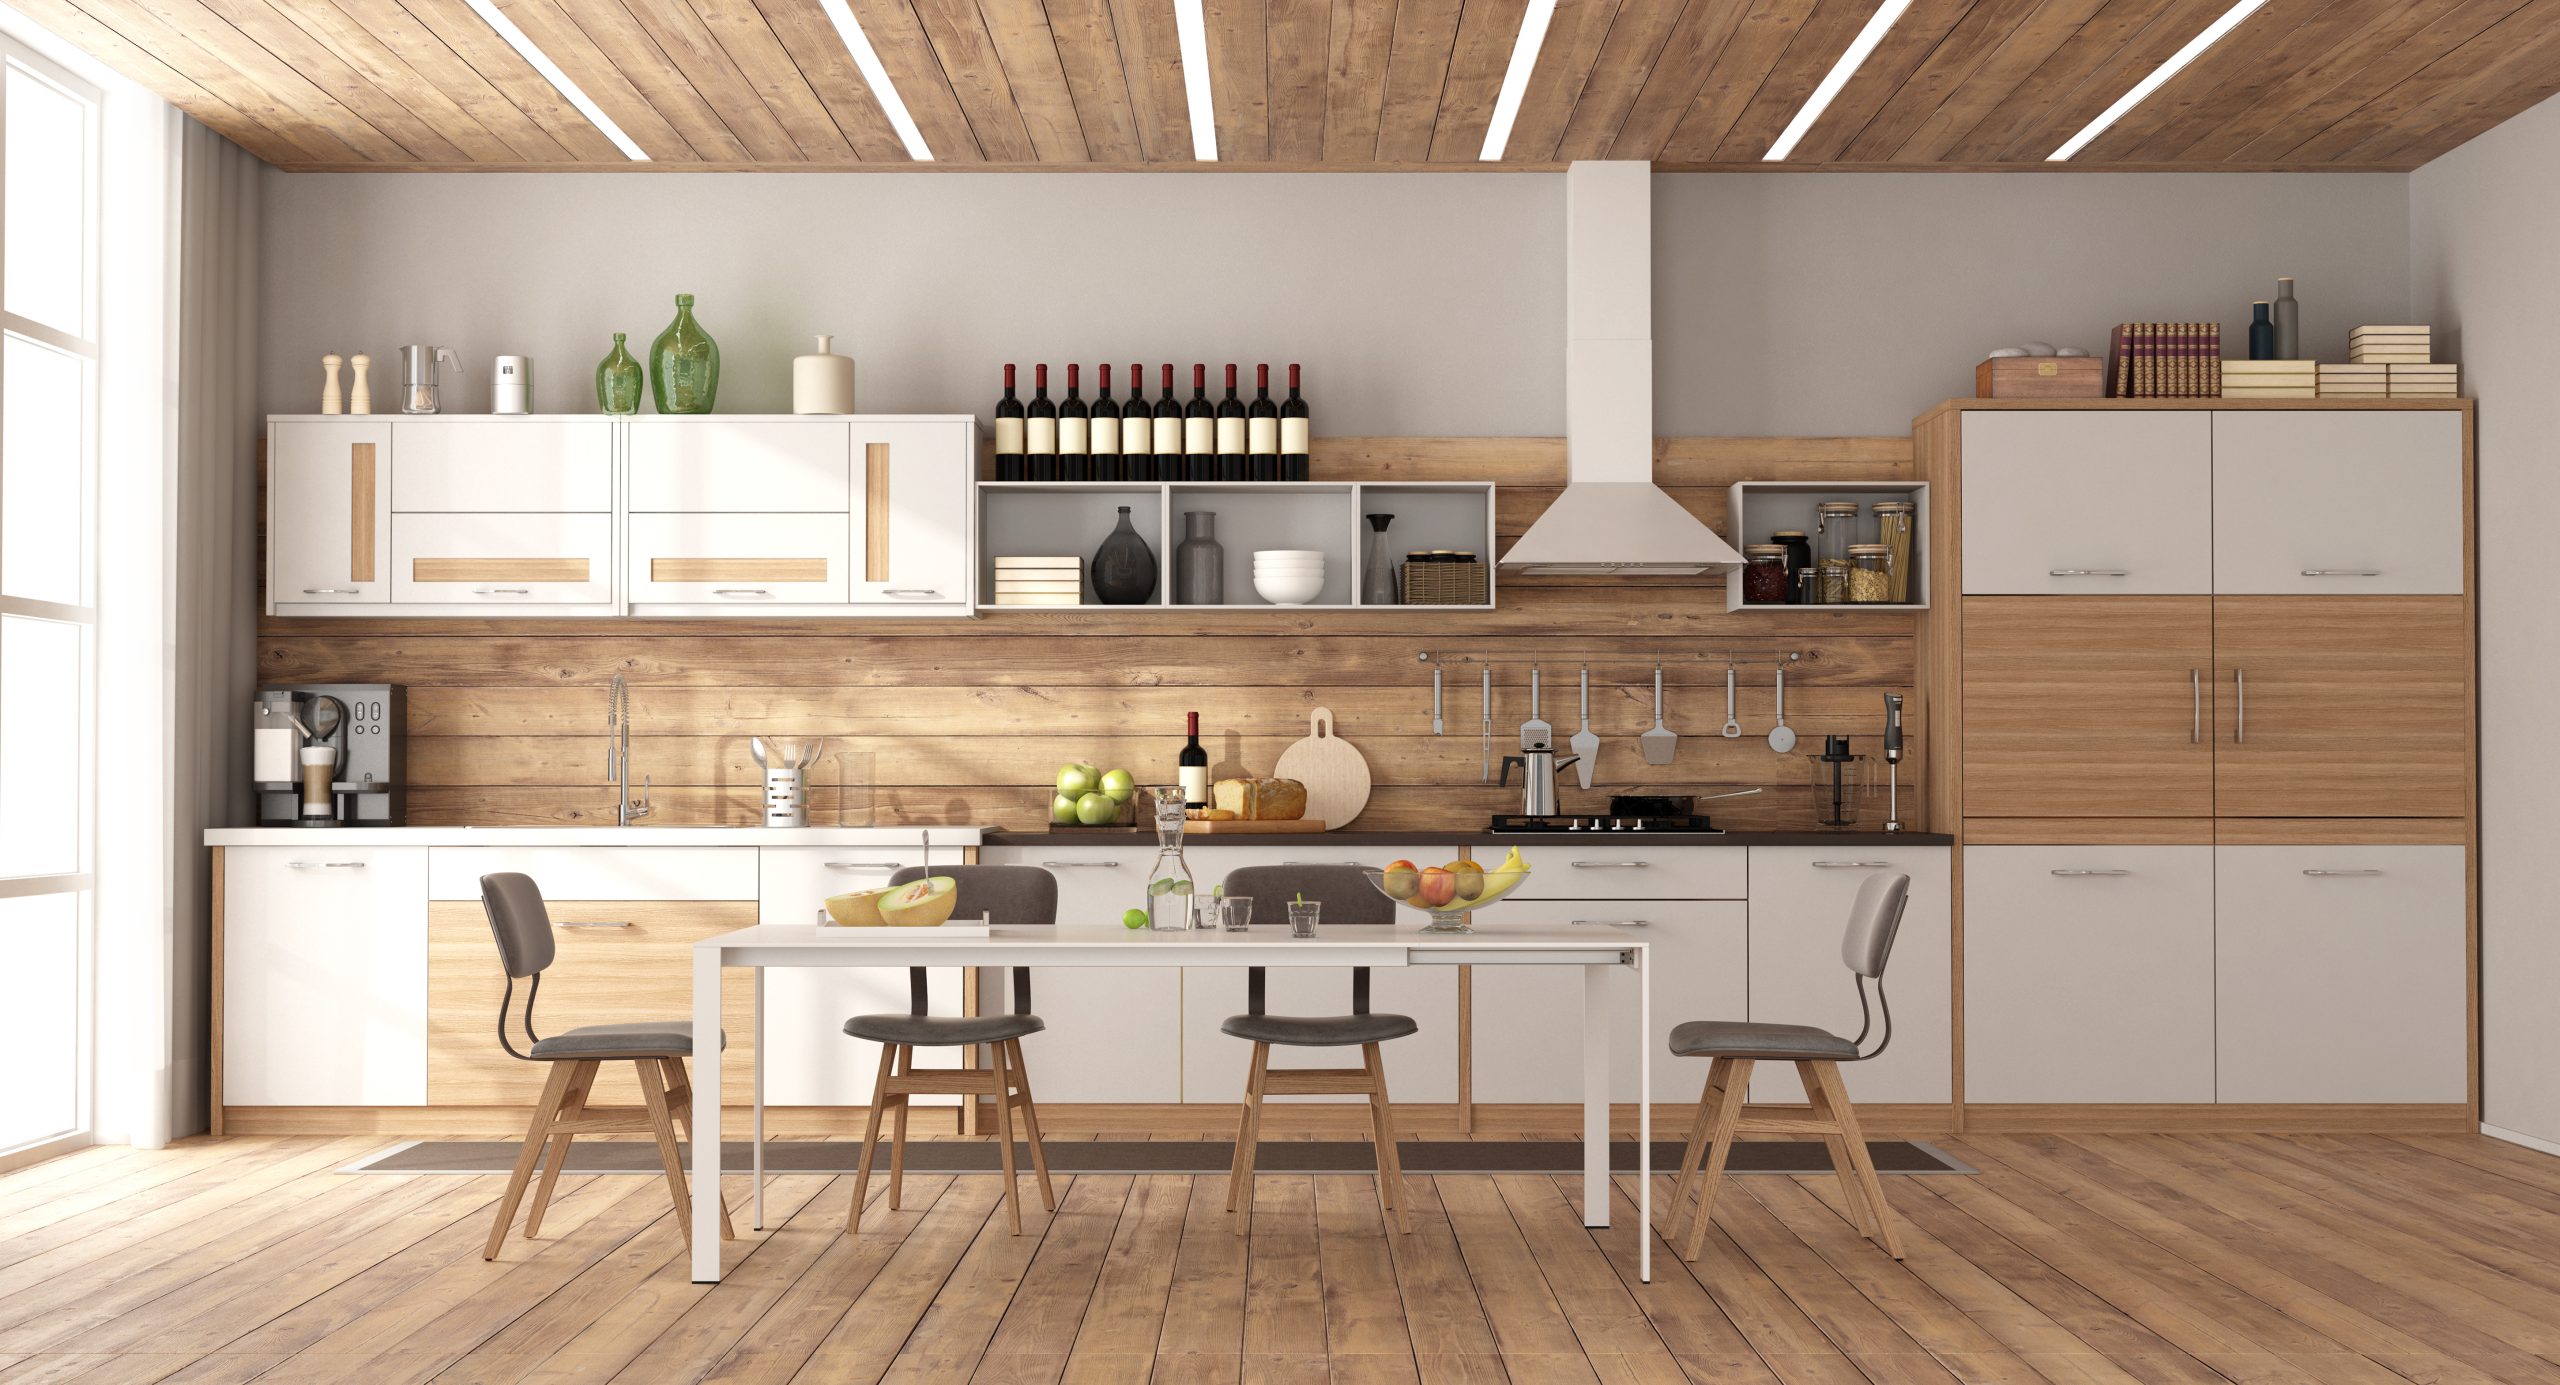 Modern white and wooden kitchen with dining table on hardwood floor - 3d rendering